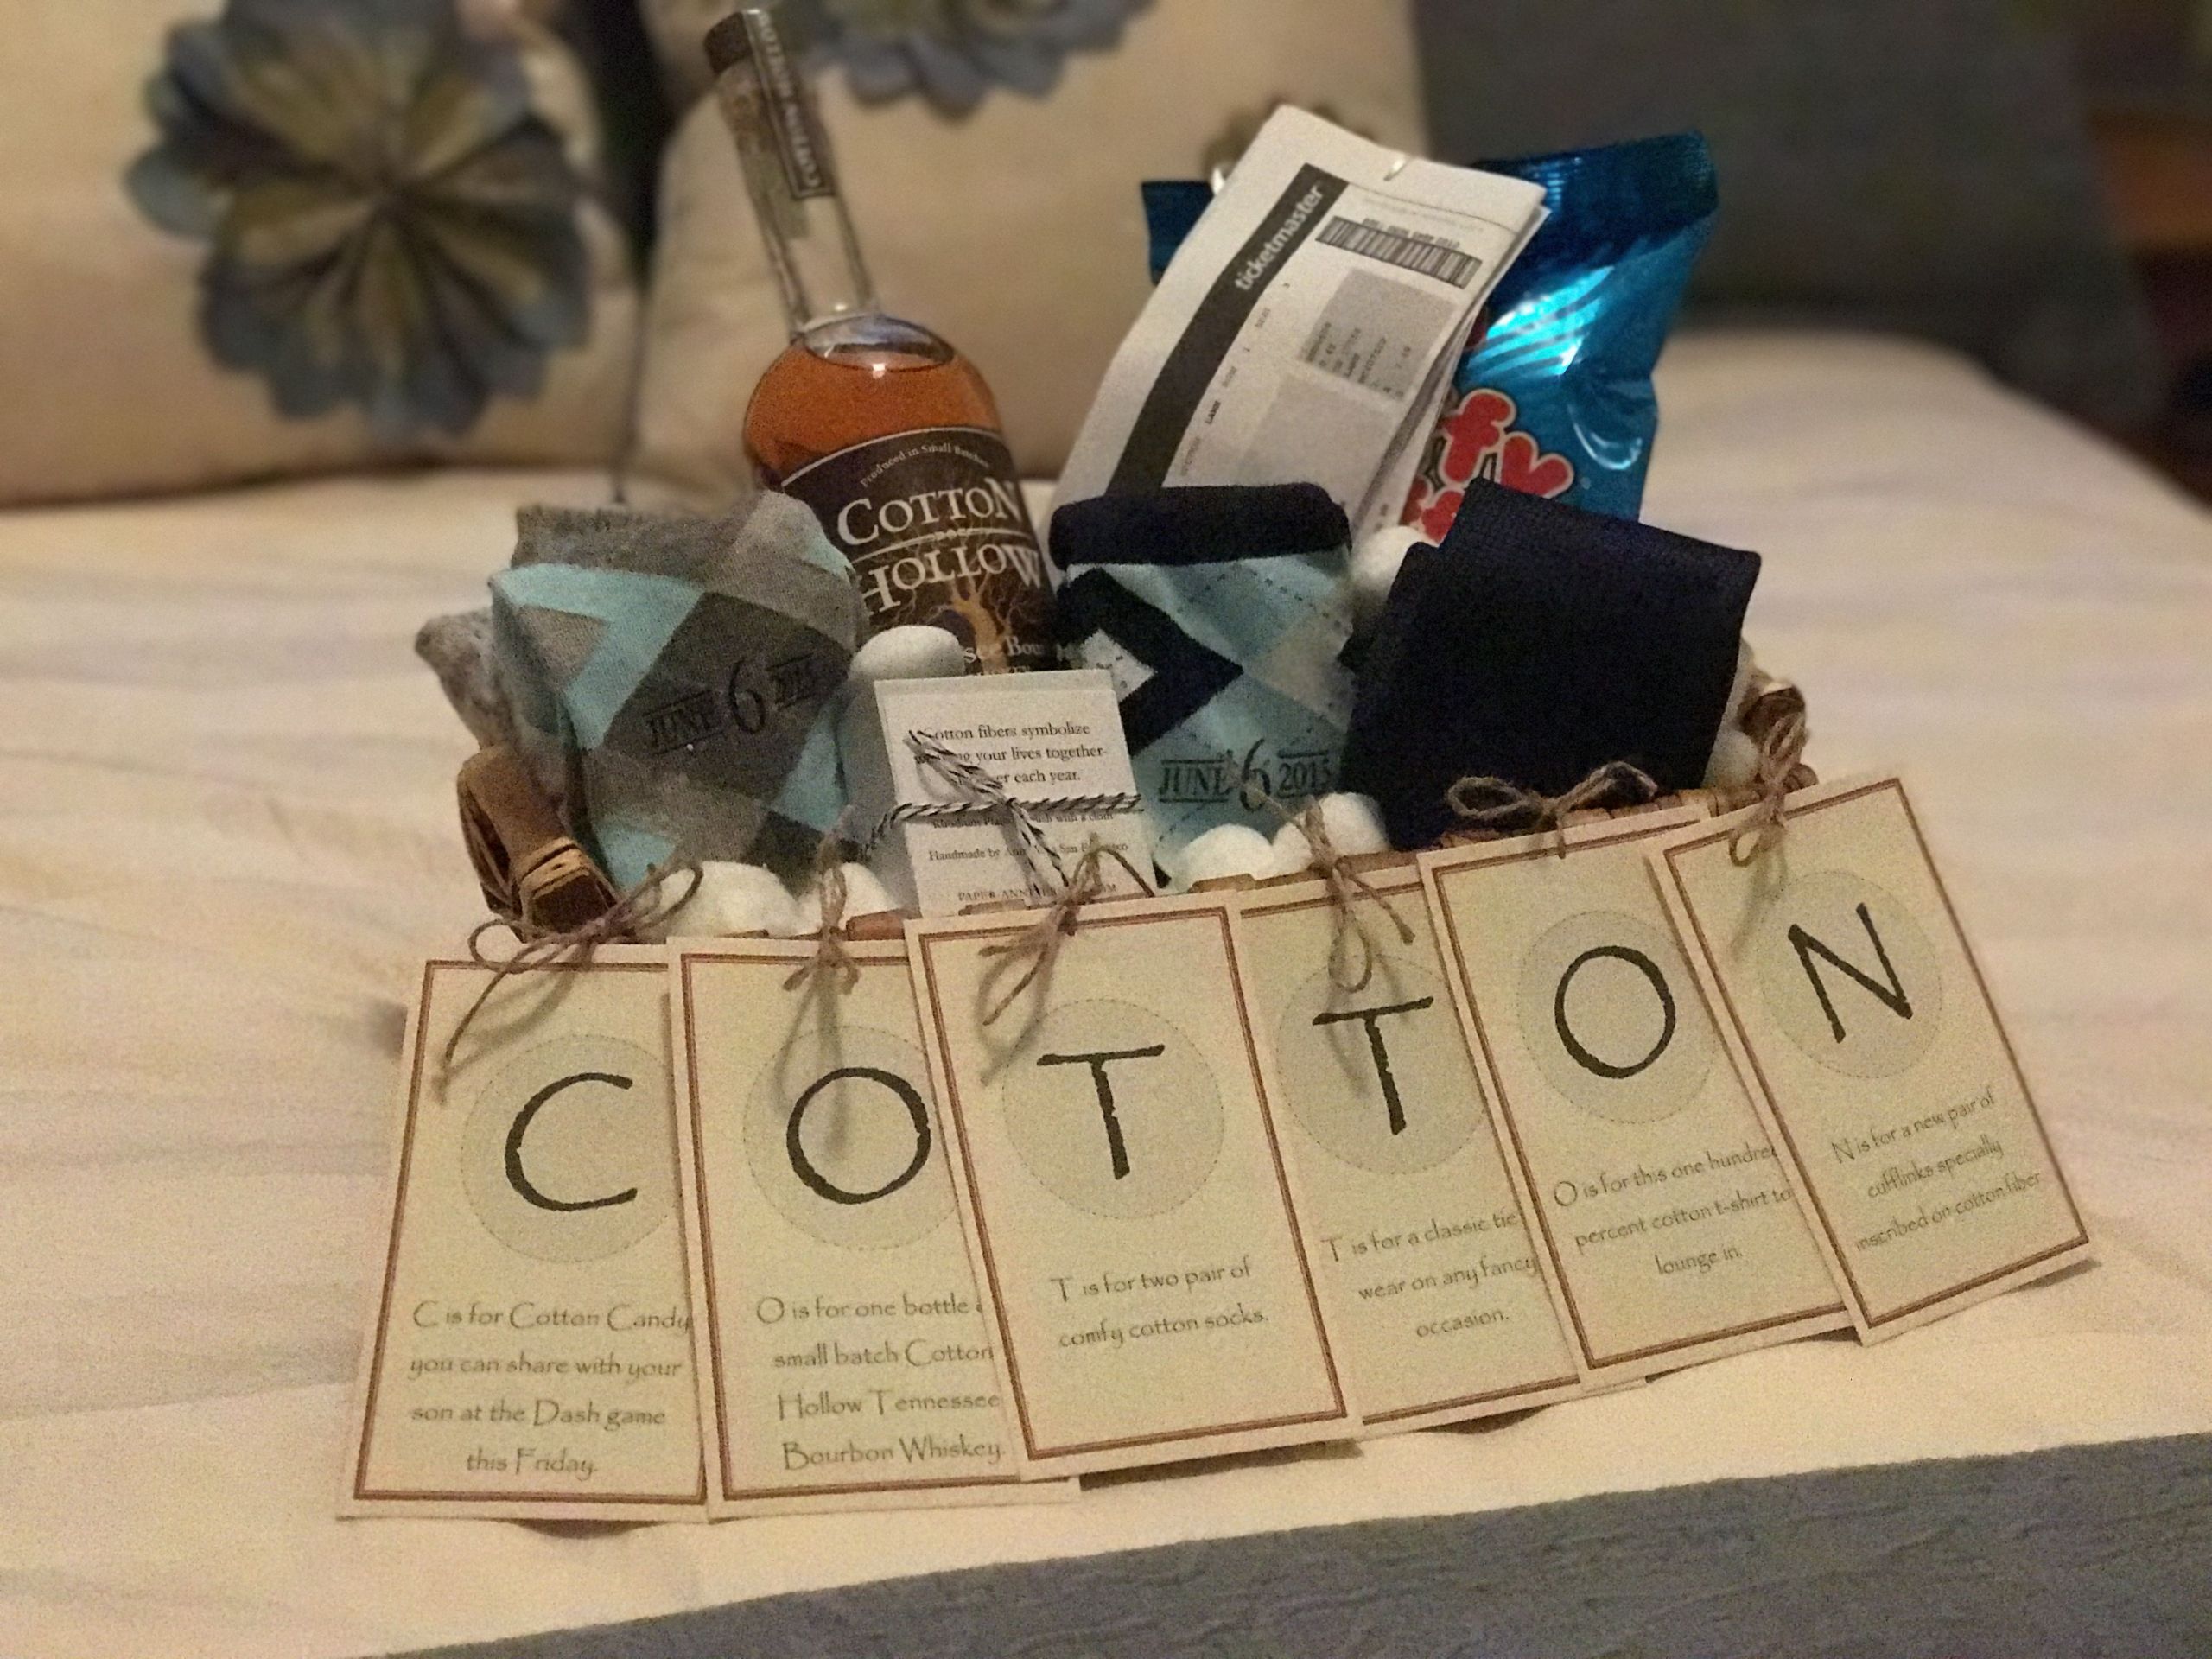 2Nd Wedding Anniversary Gift Ideas For Him
 The "Cotton" Anniversary Gift for Him